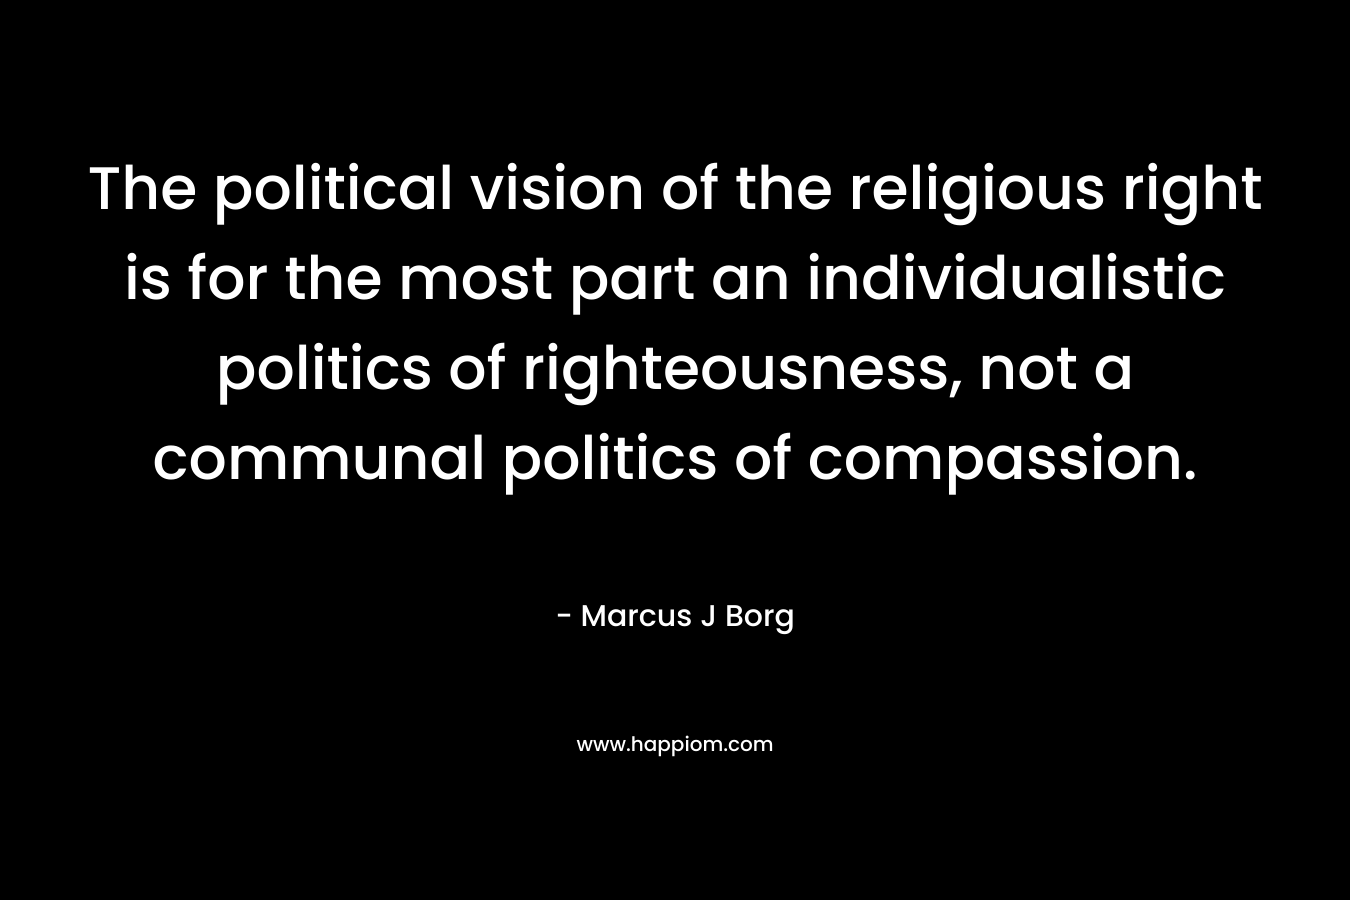 The political vision of the religious right is for the most part an individualistic politics of righteousness, not a communal politics of compassion.